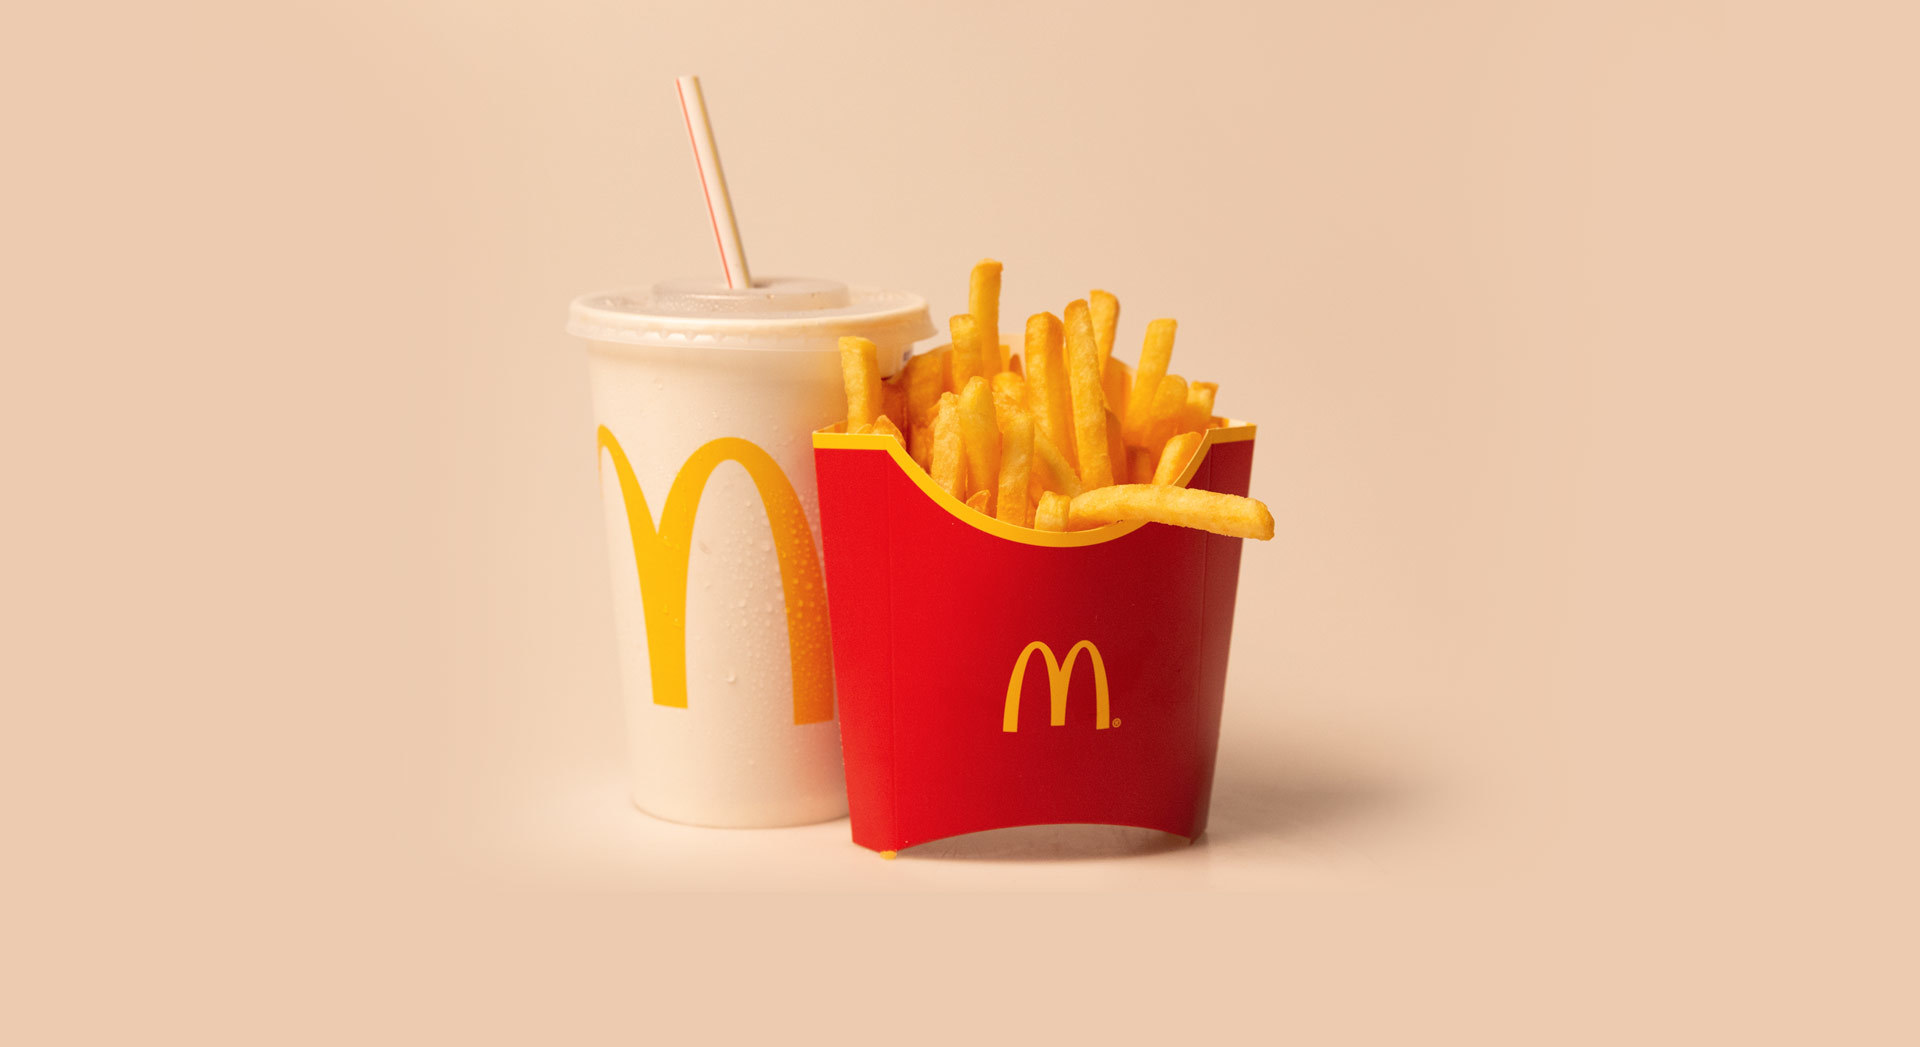 Know Our Food - Why do McDonald's fries go rock-hard after sitting out for a while?